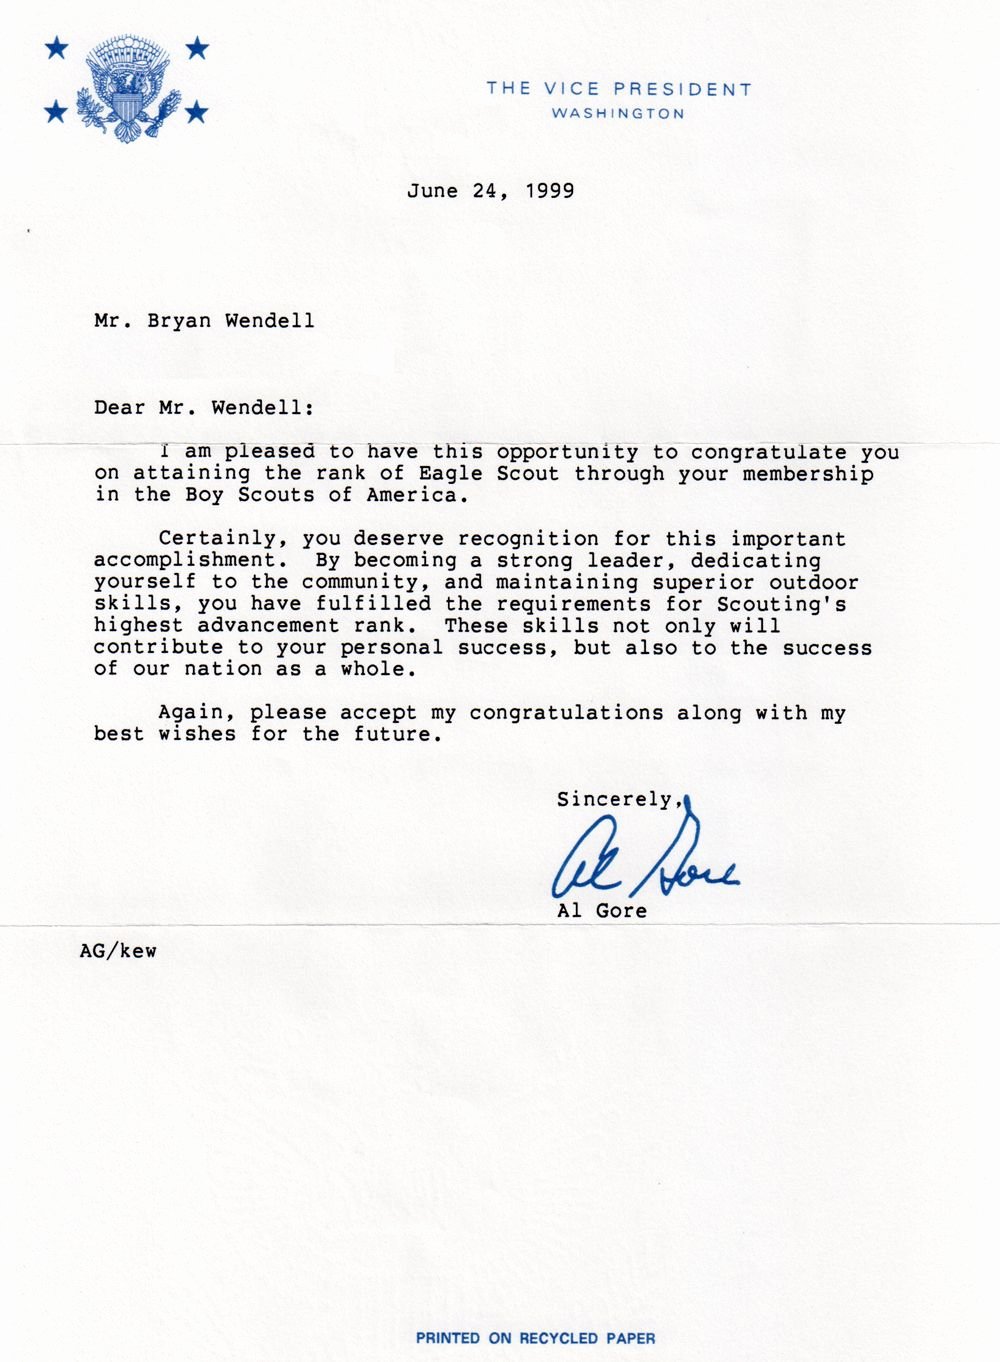 Boy Scout Letter Of Recommendation Elegant View source Image